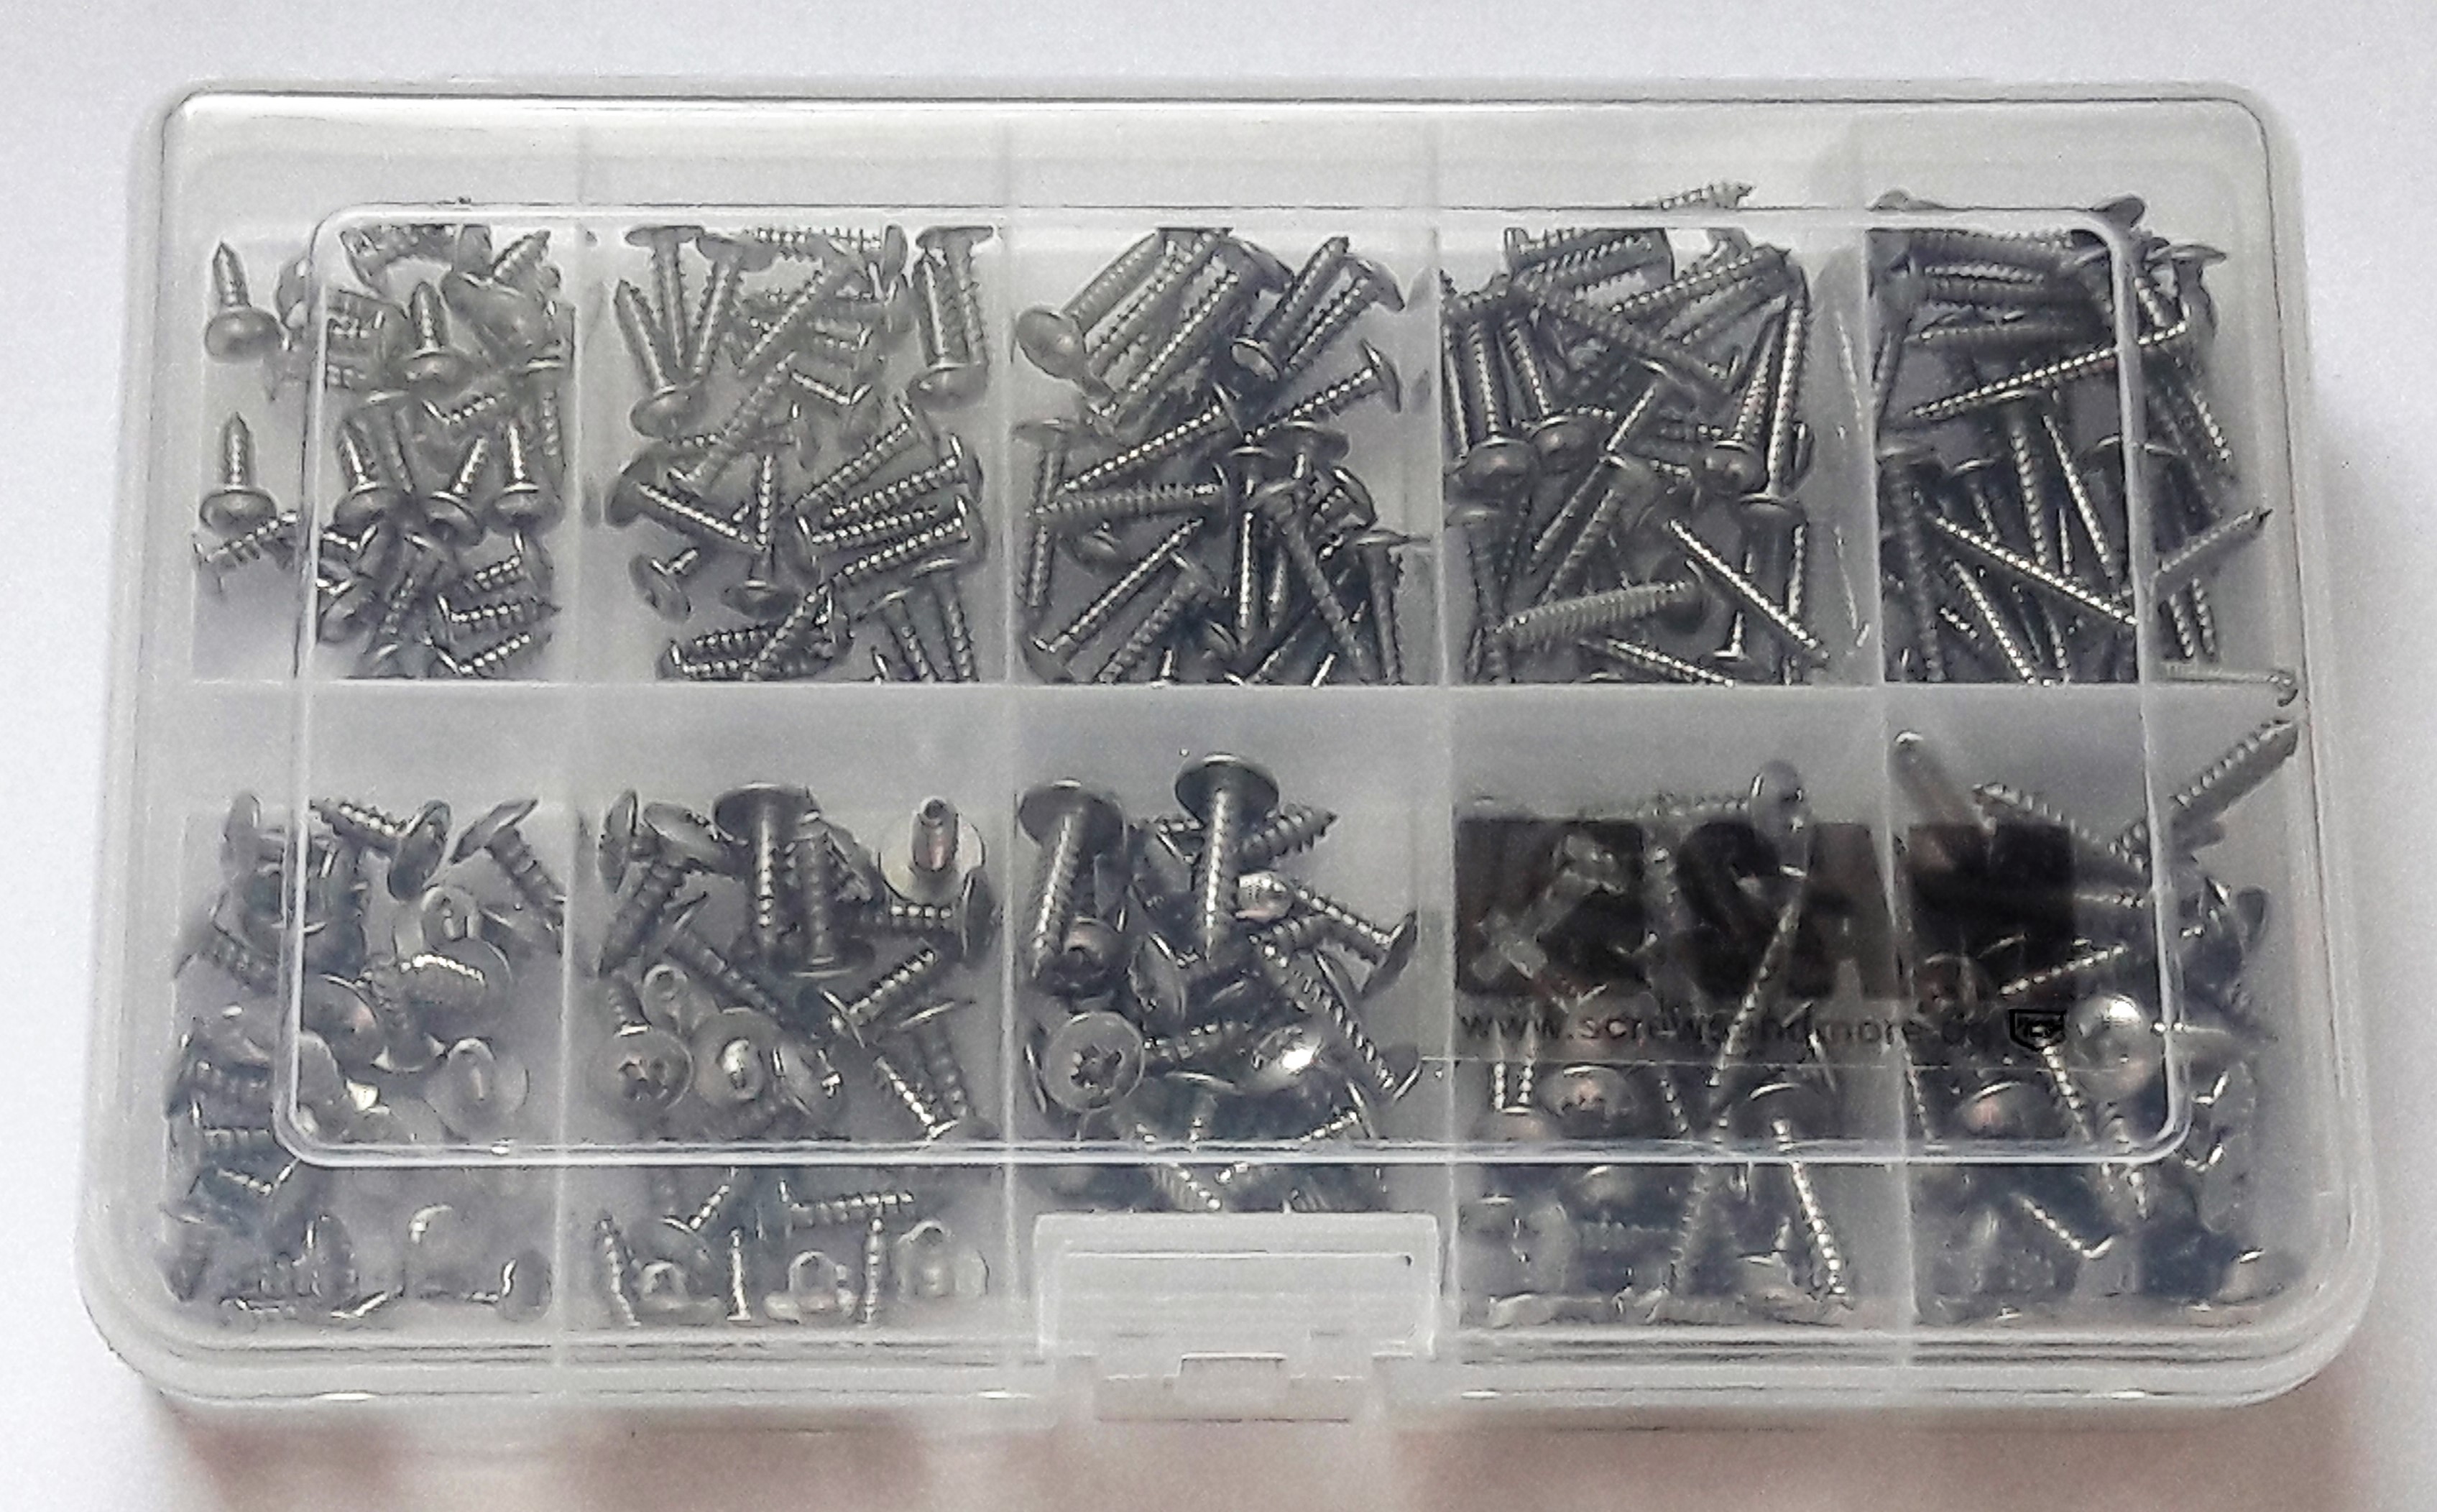 4,2/4,8 self tapping screws set 250 pcs DIN 7981 flanged A2